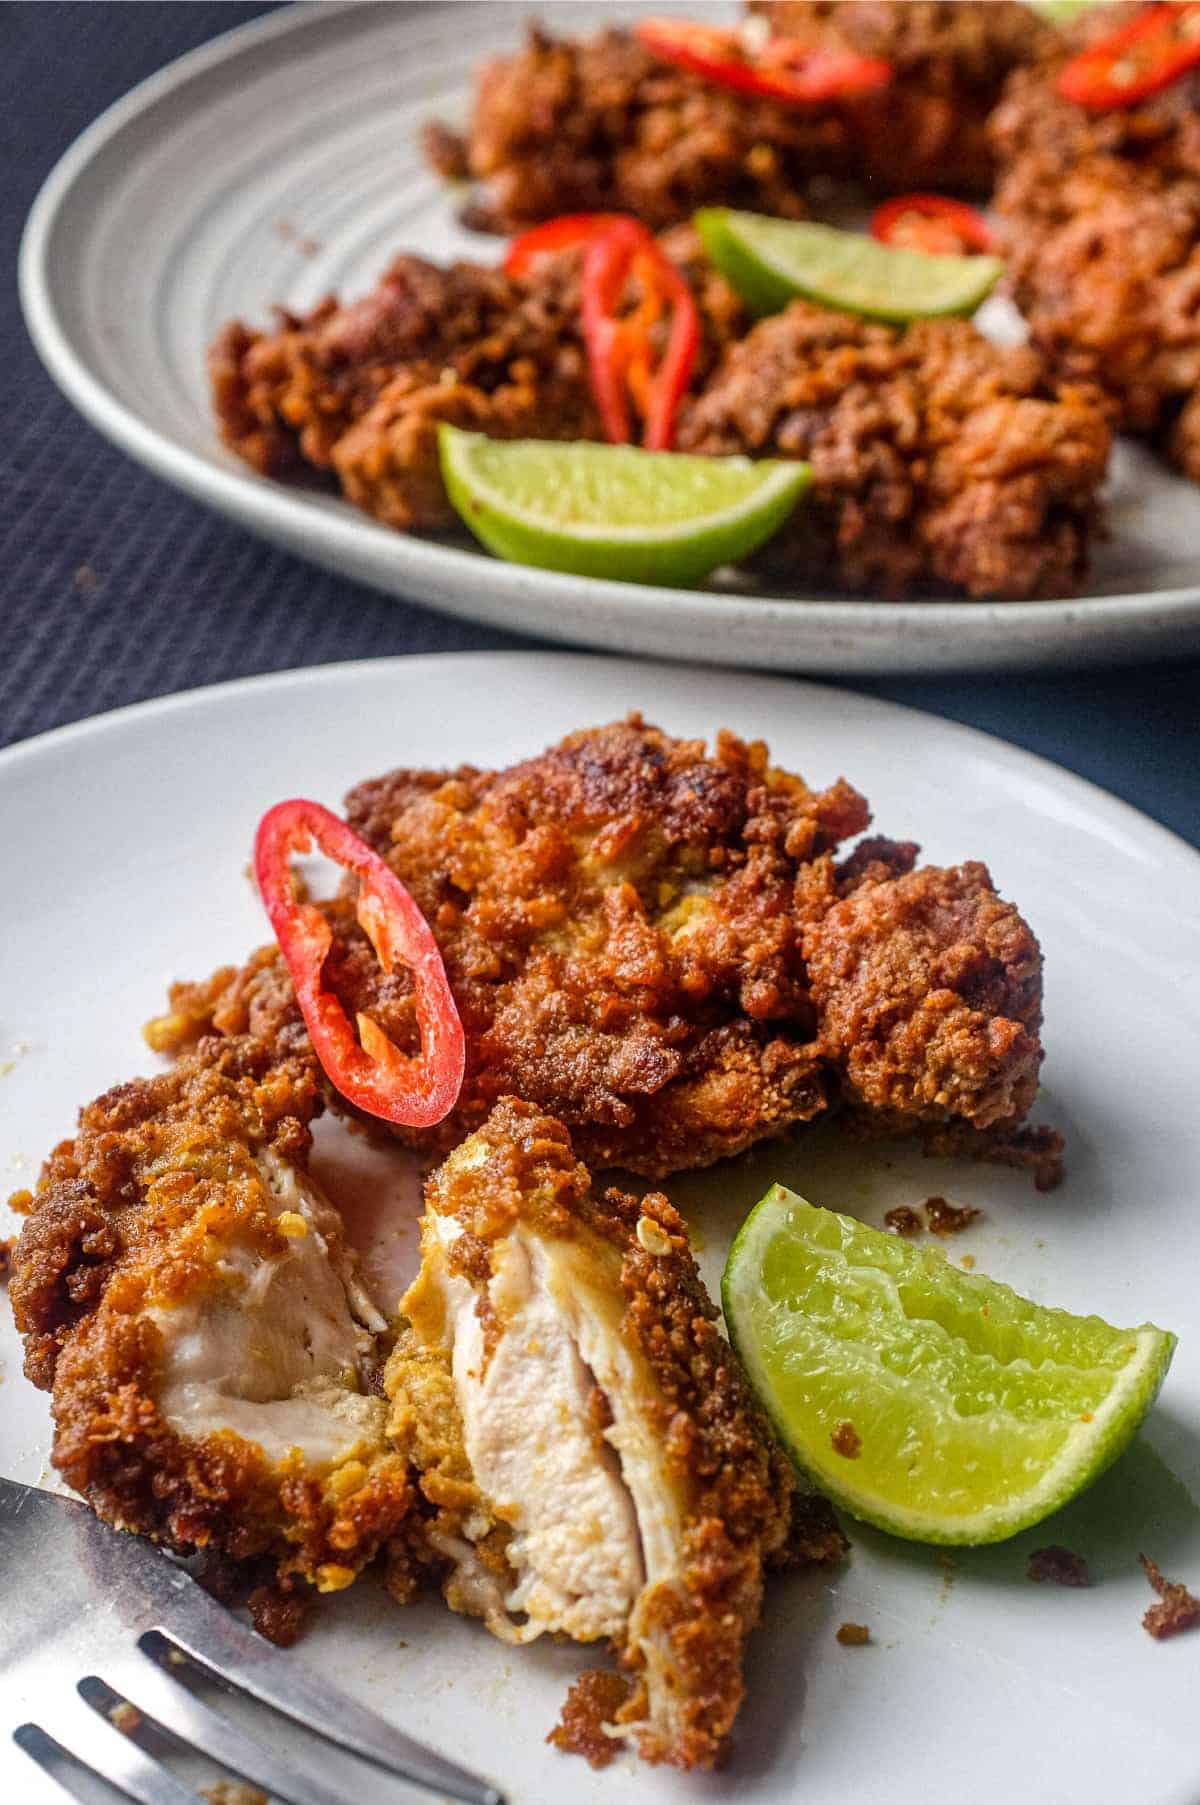 A piece of Ayam Goreng (Malaysian fried chicken) on plate with a lime wedge and slice of chilli. A bowl of the chicken sits in the background.